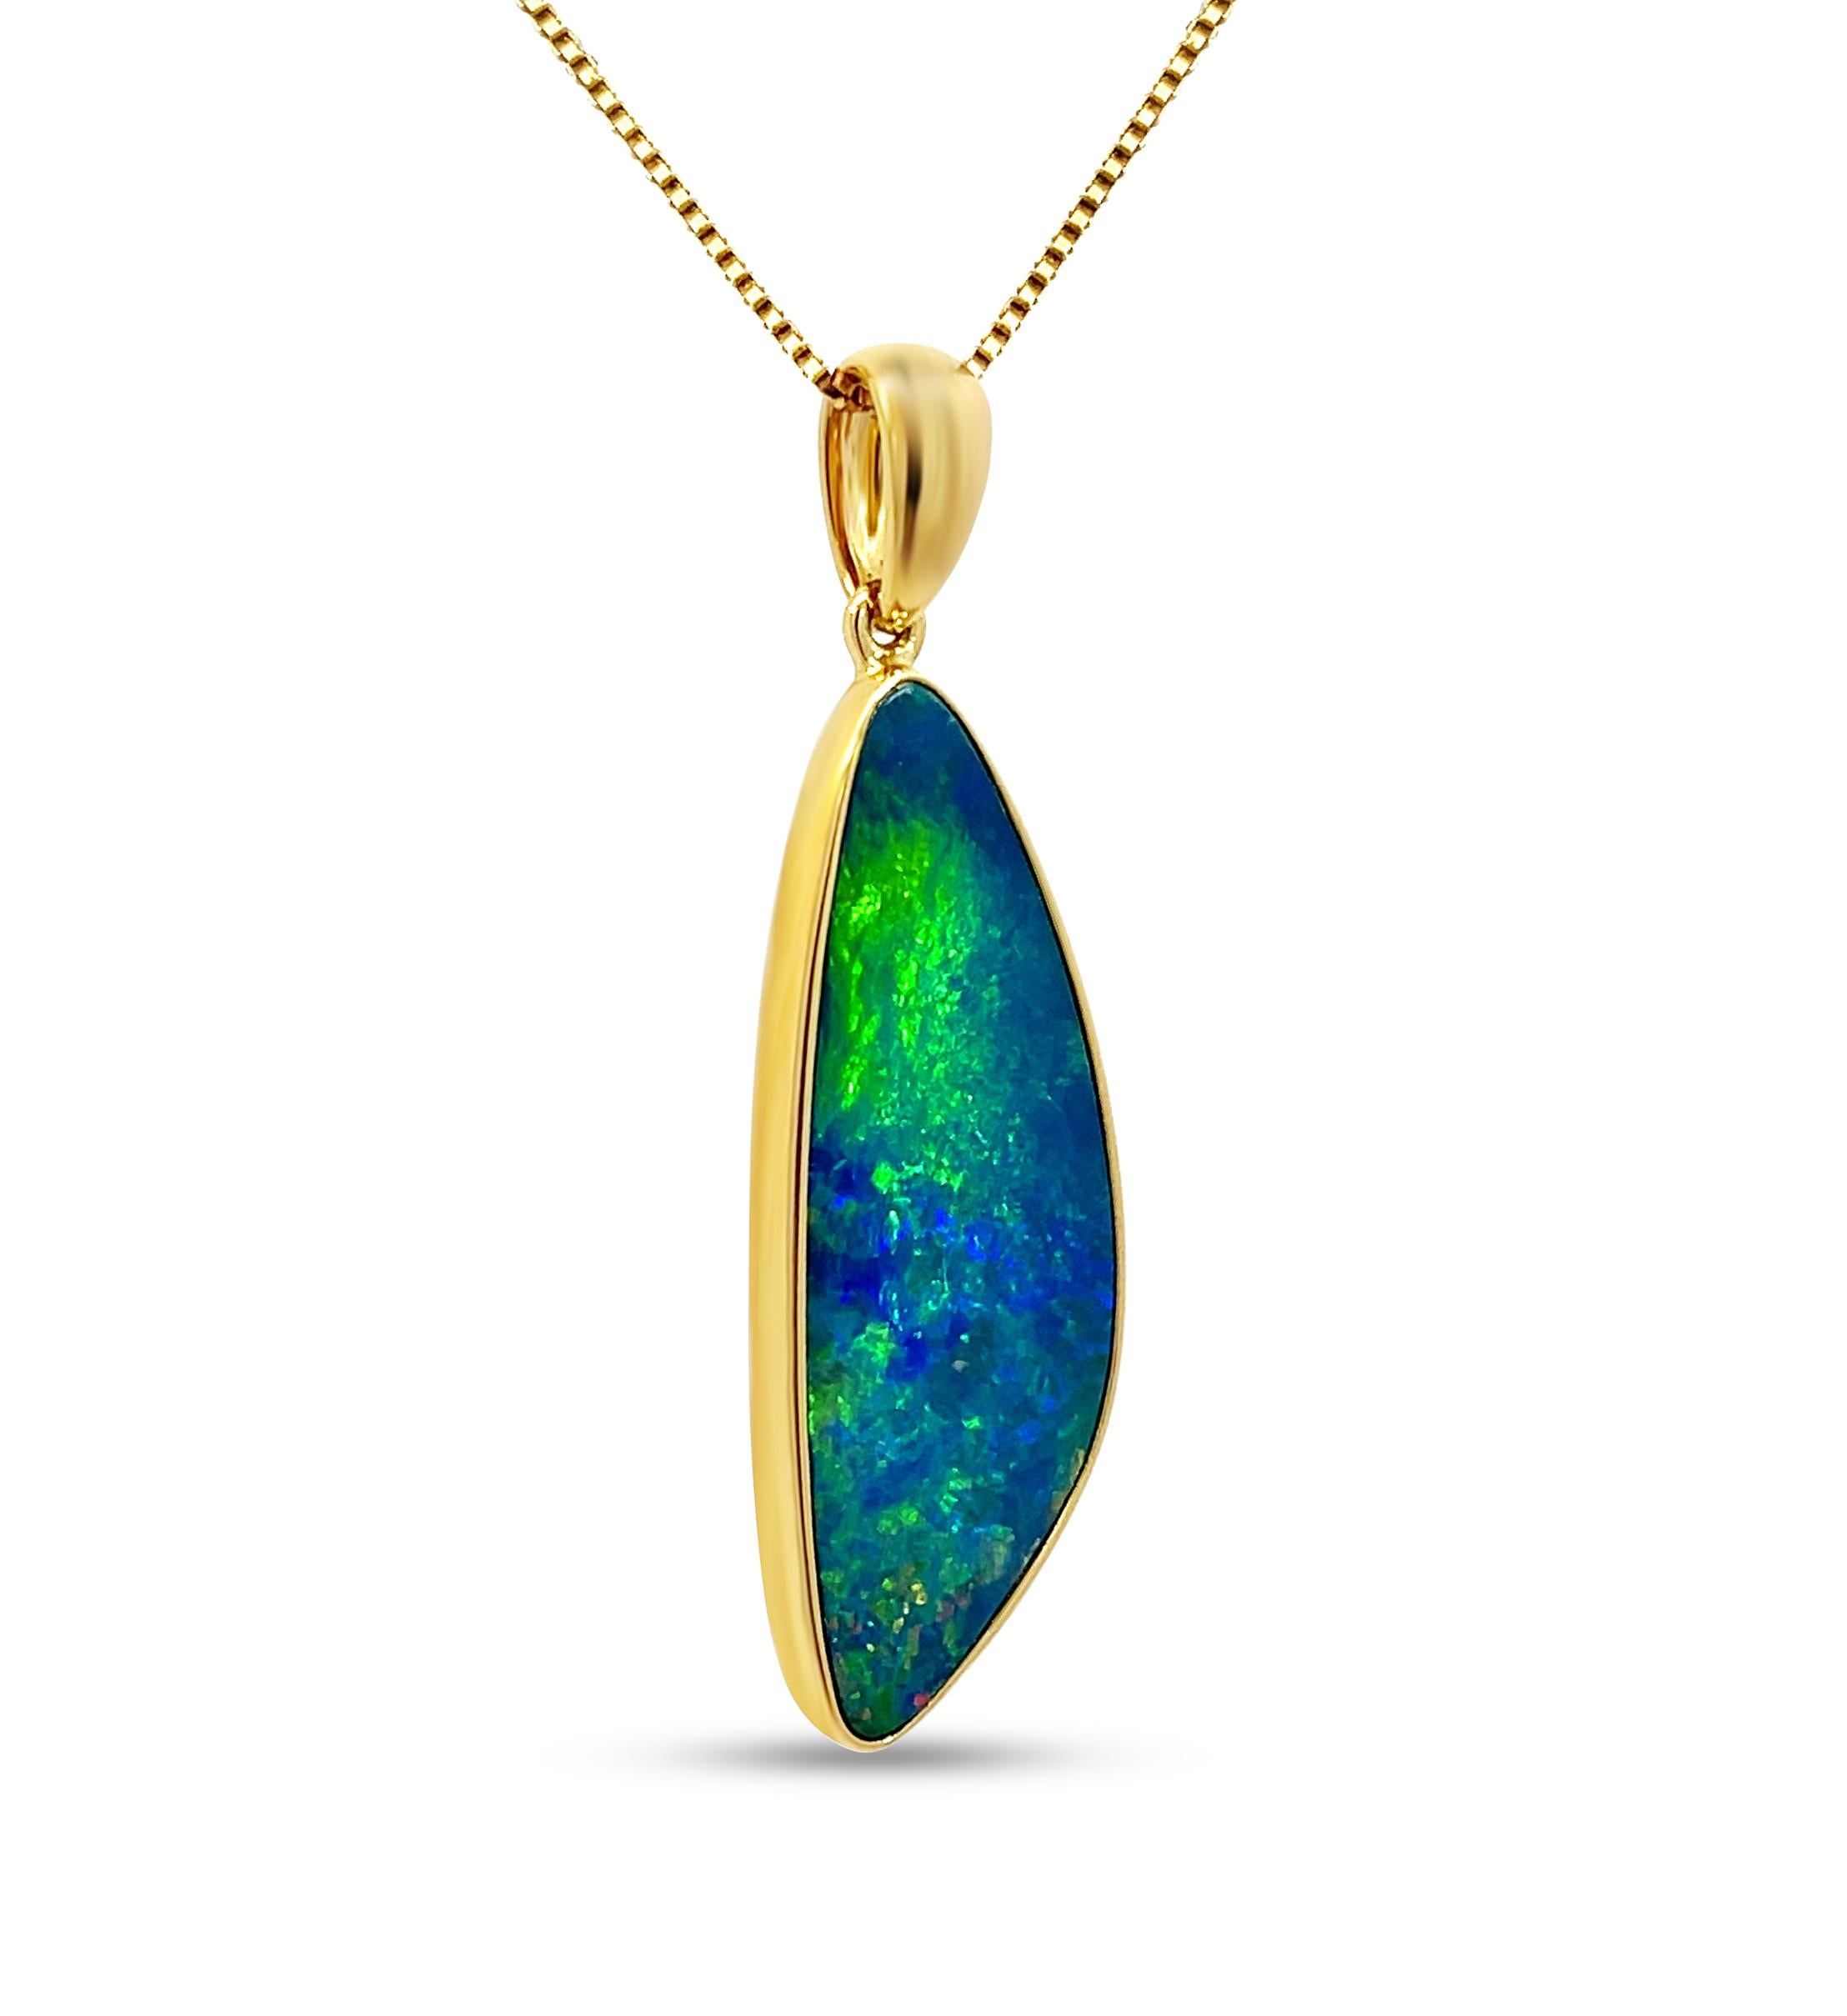 Cabochon Premium Quality Australian 8.65ct Opal Pendant Crafted in 18K Yellow Gold For Sale